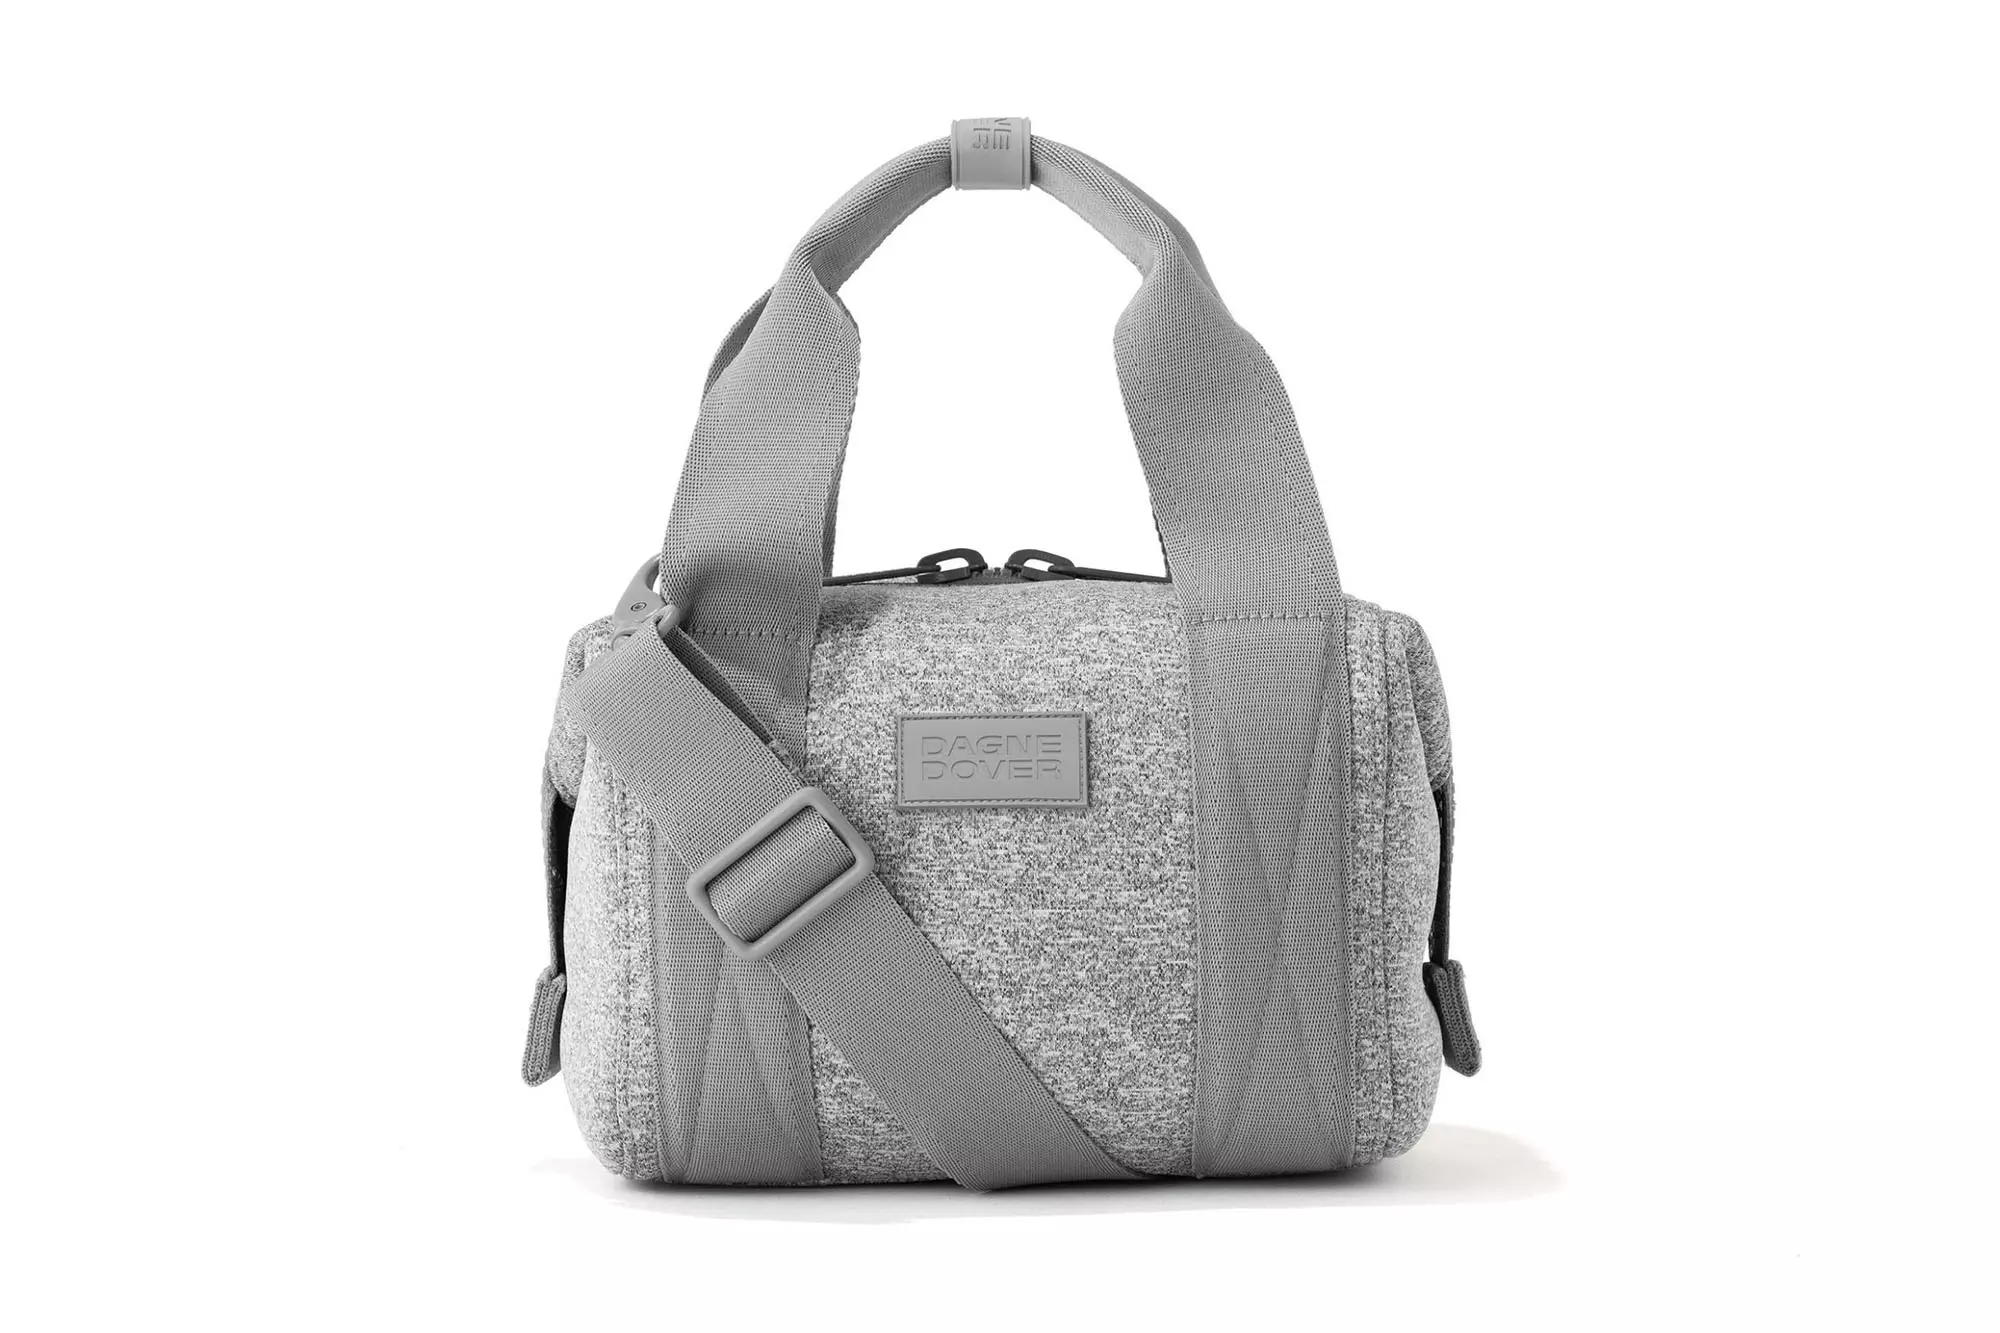 A grey bag with a strap.